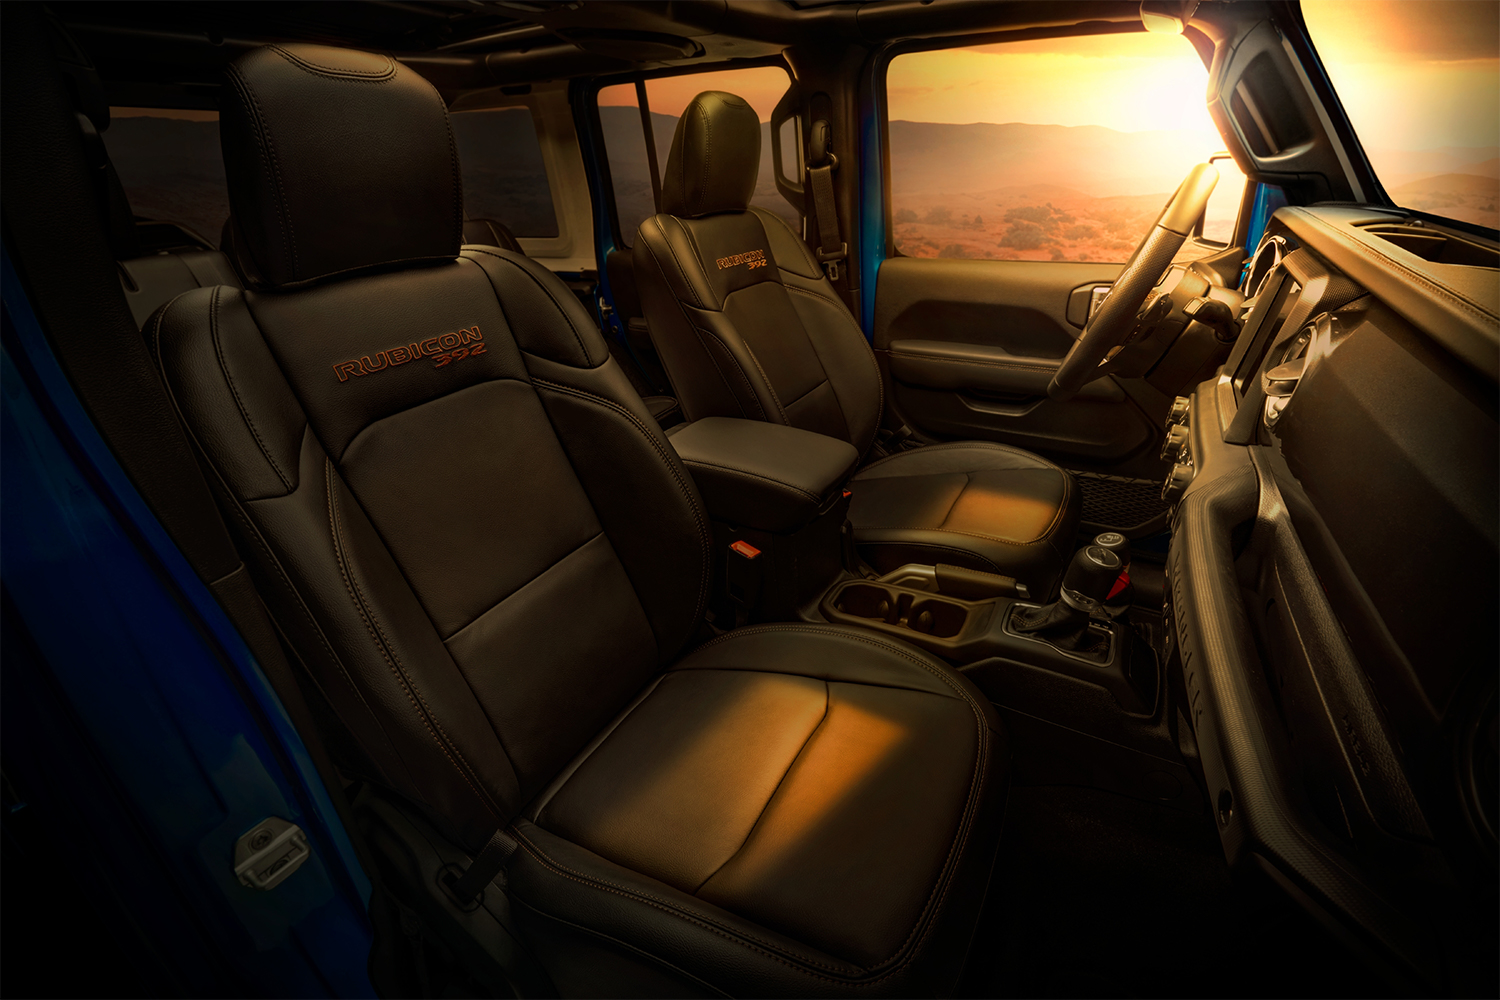 The two front seats of the 2022 Jeep Wrangler Rubicon 392, an off-road SUV with a V8 engine